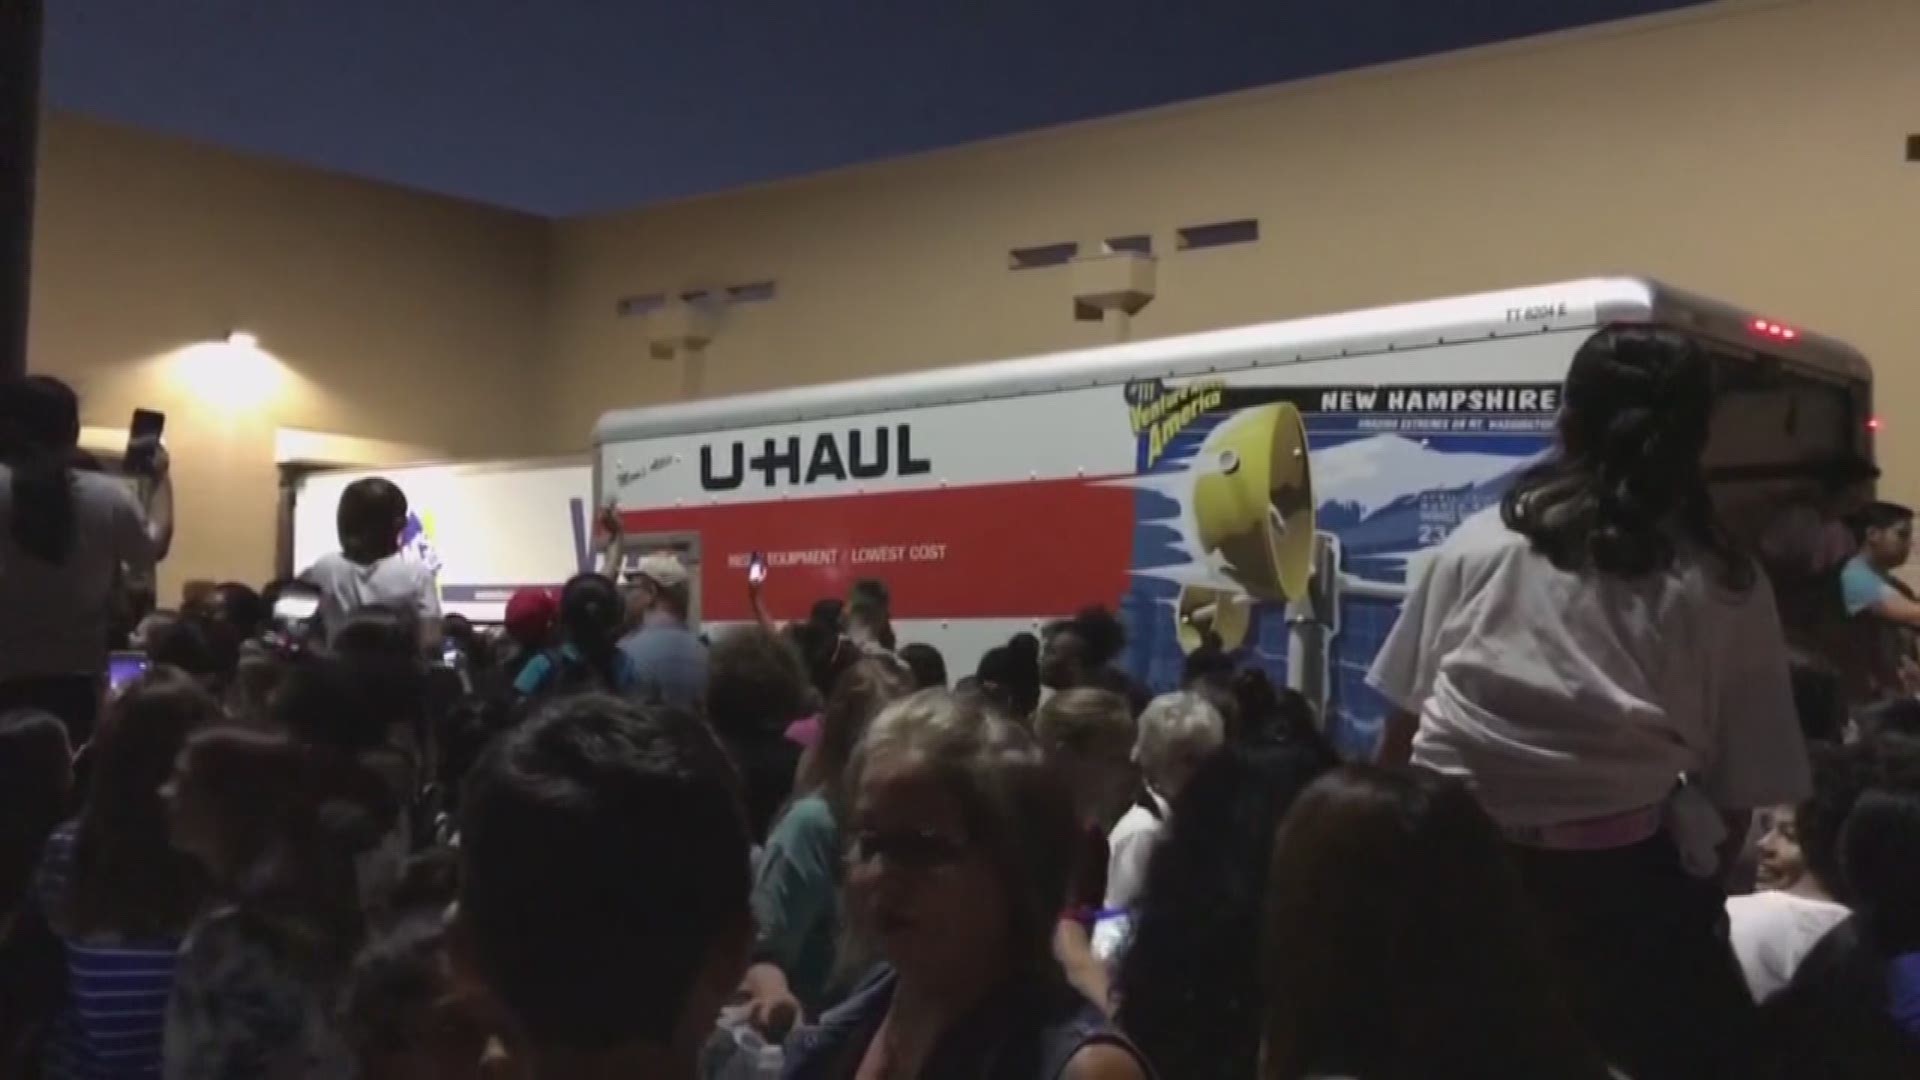 The actor and Youtube star, Jake Paul, posted on his Twitter page Tuesday afternoon that he wants to fill two Uhaul trucks with supplies to take to Houston.